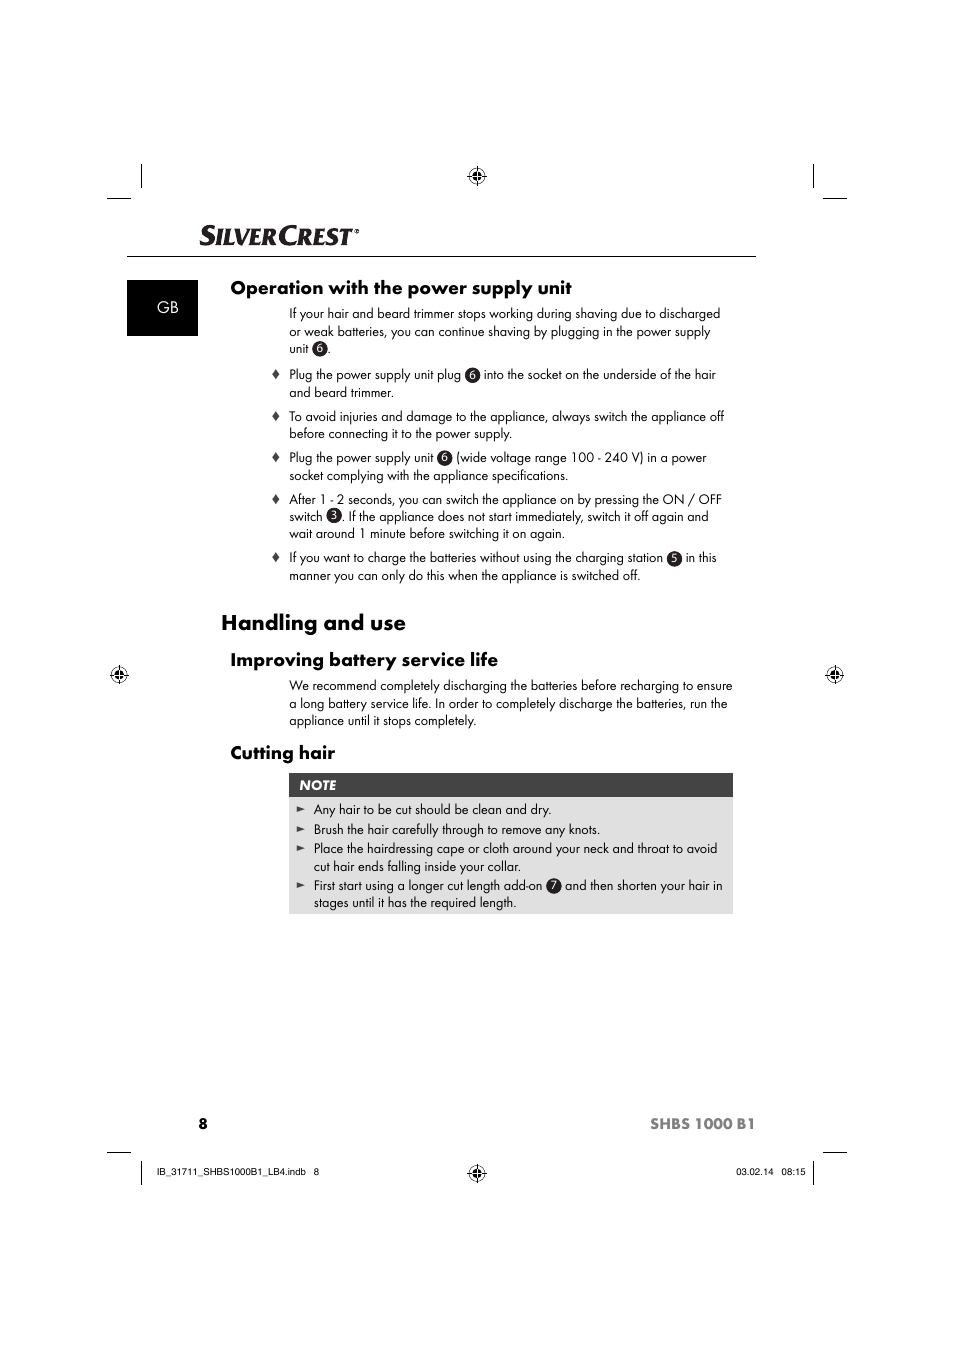 Handling and use, Operation with the power supply unit, Improving battery  service life | Silvercrest SHBS 1000 A1 User Manual | Page 11 / 102 |  Original mode